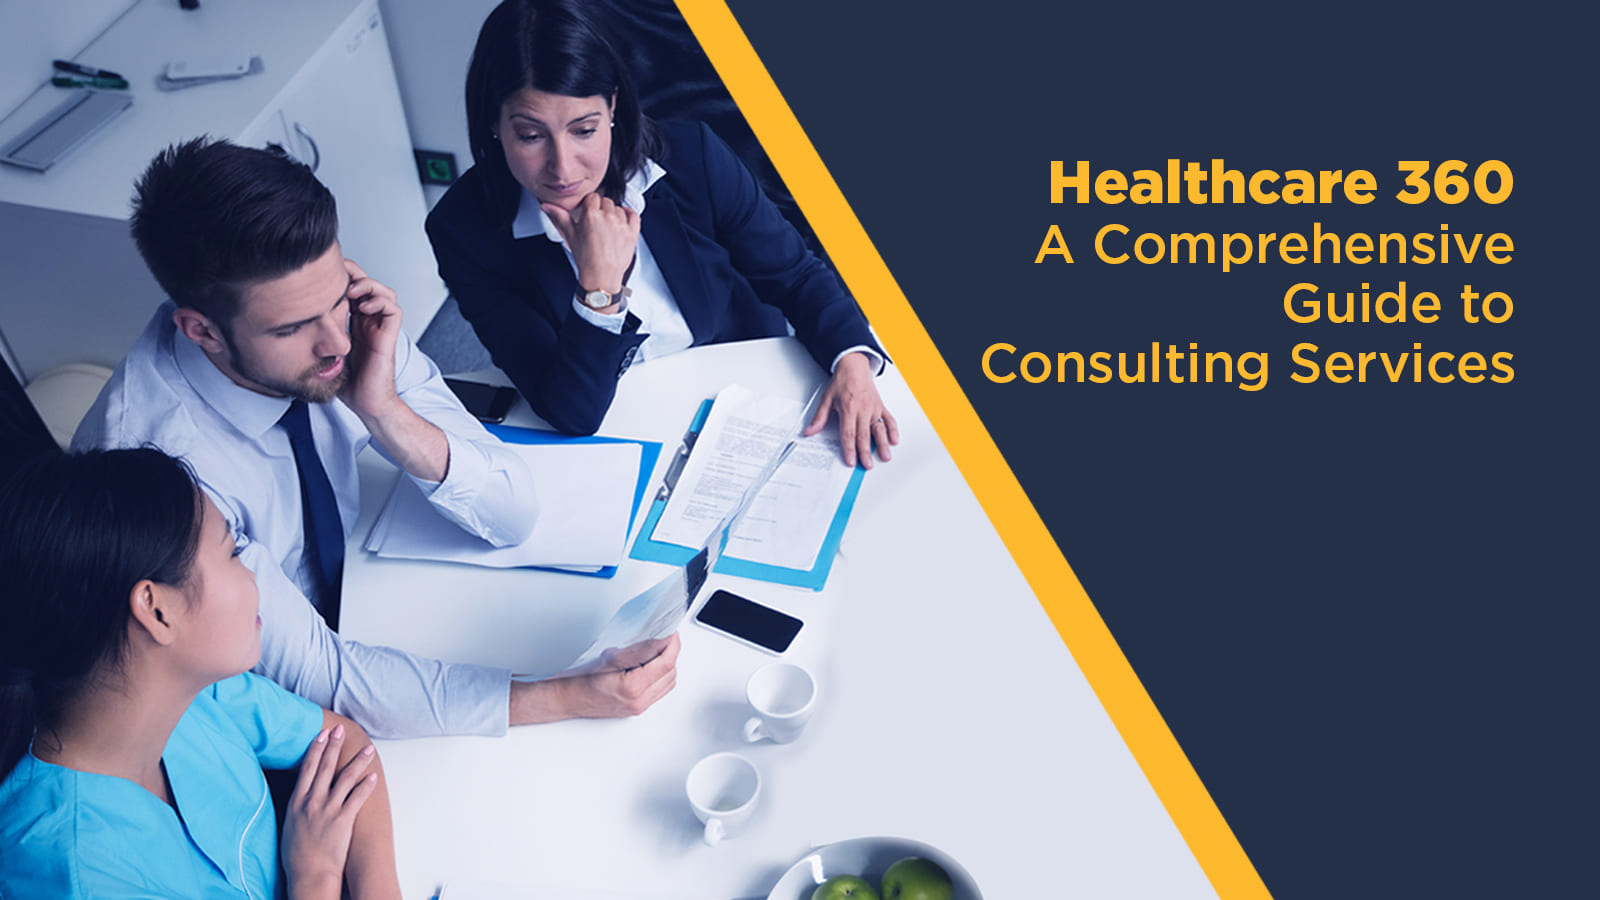 Healthcare Consulting Services